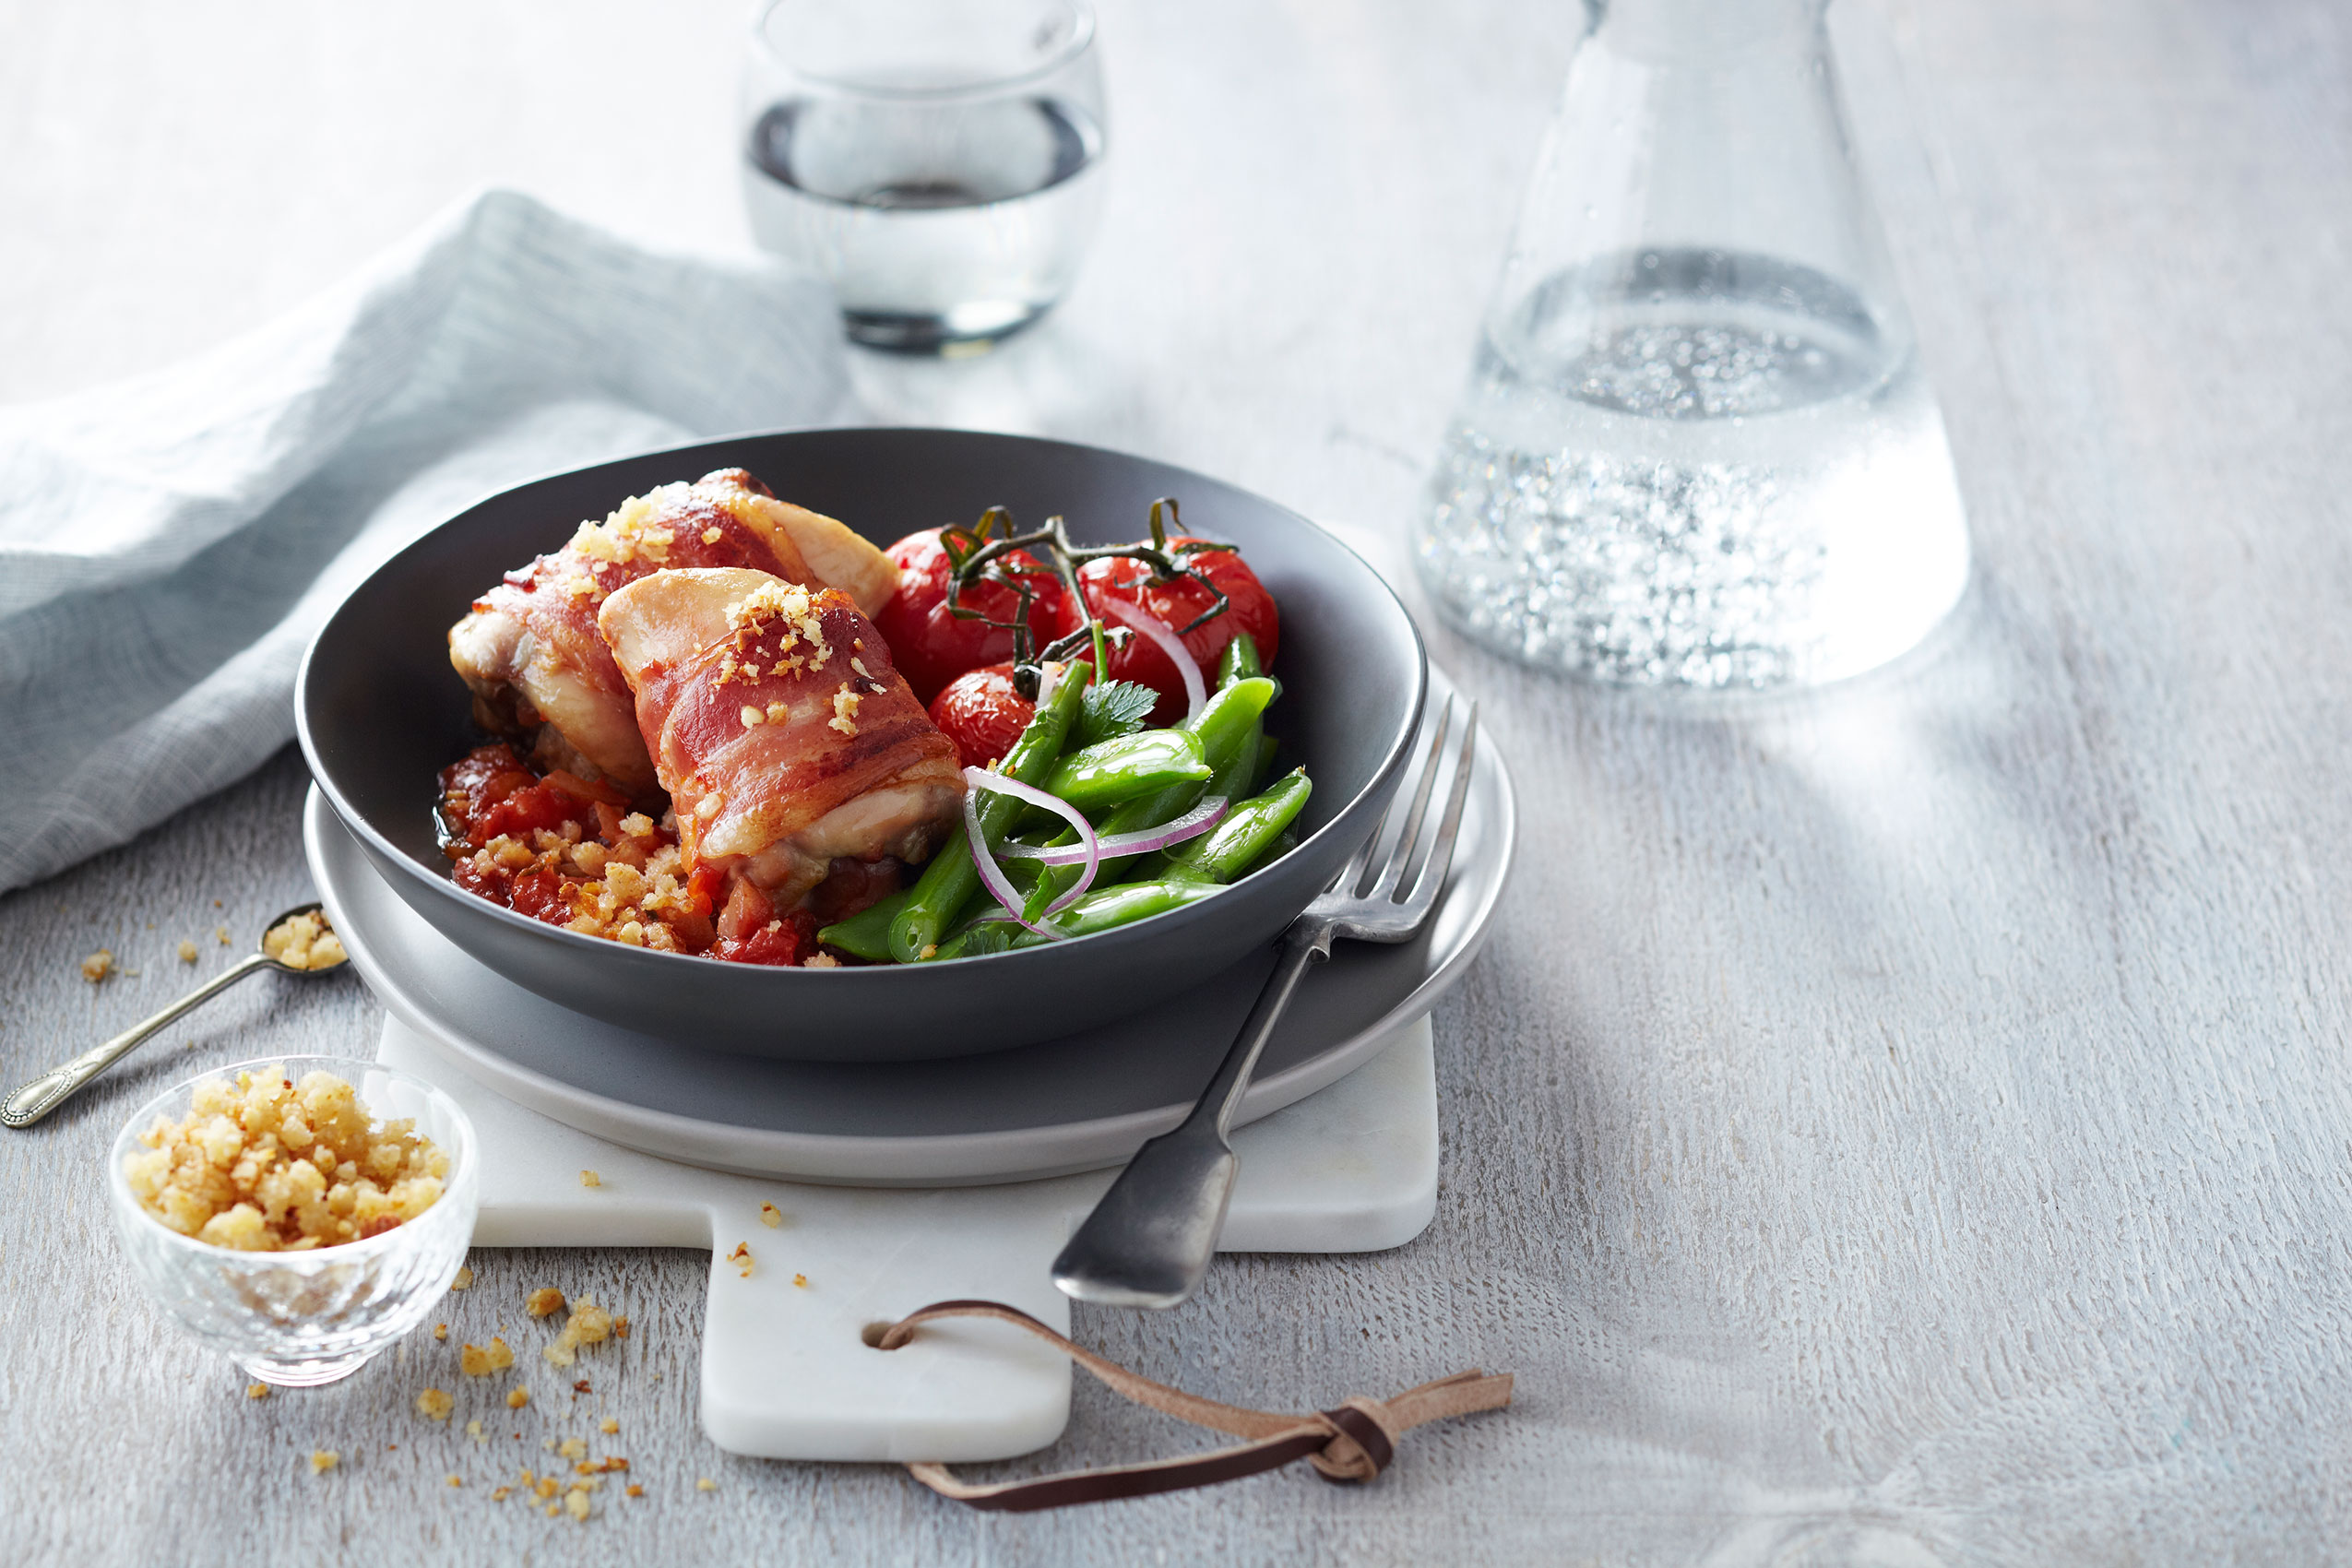 Tegel Rangitikei Roasted Chicken Thighs & Bacon • Advertising & Editorial Food Photography